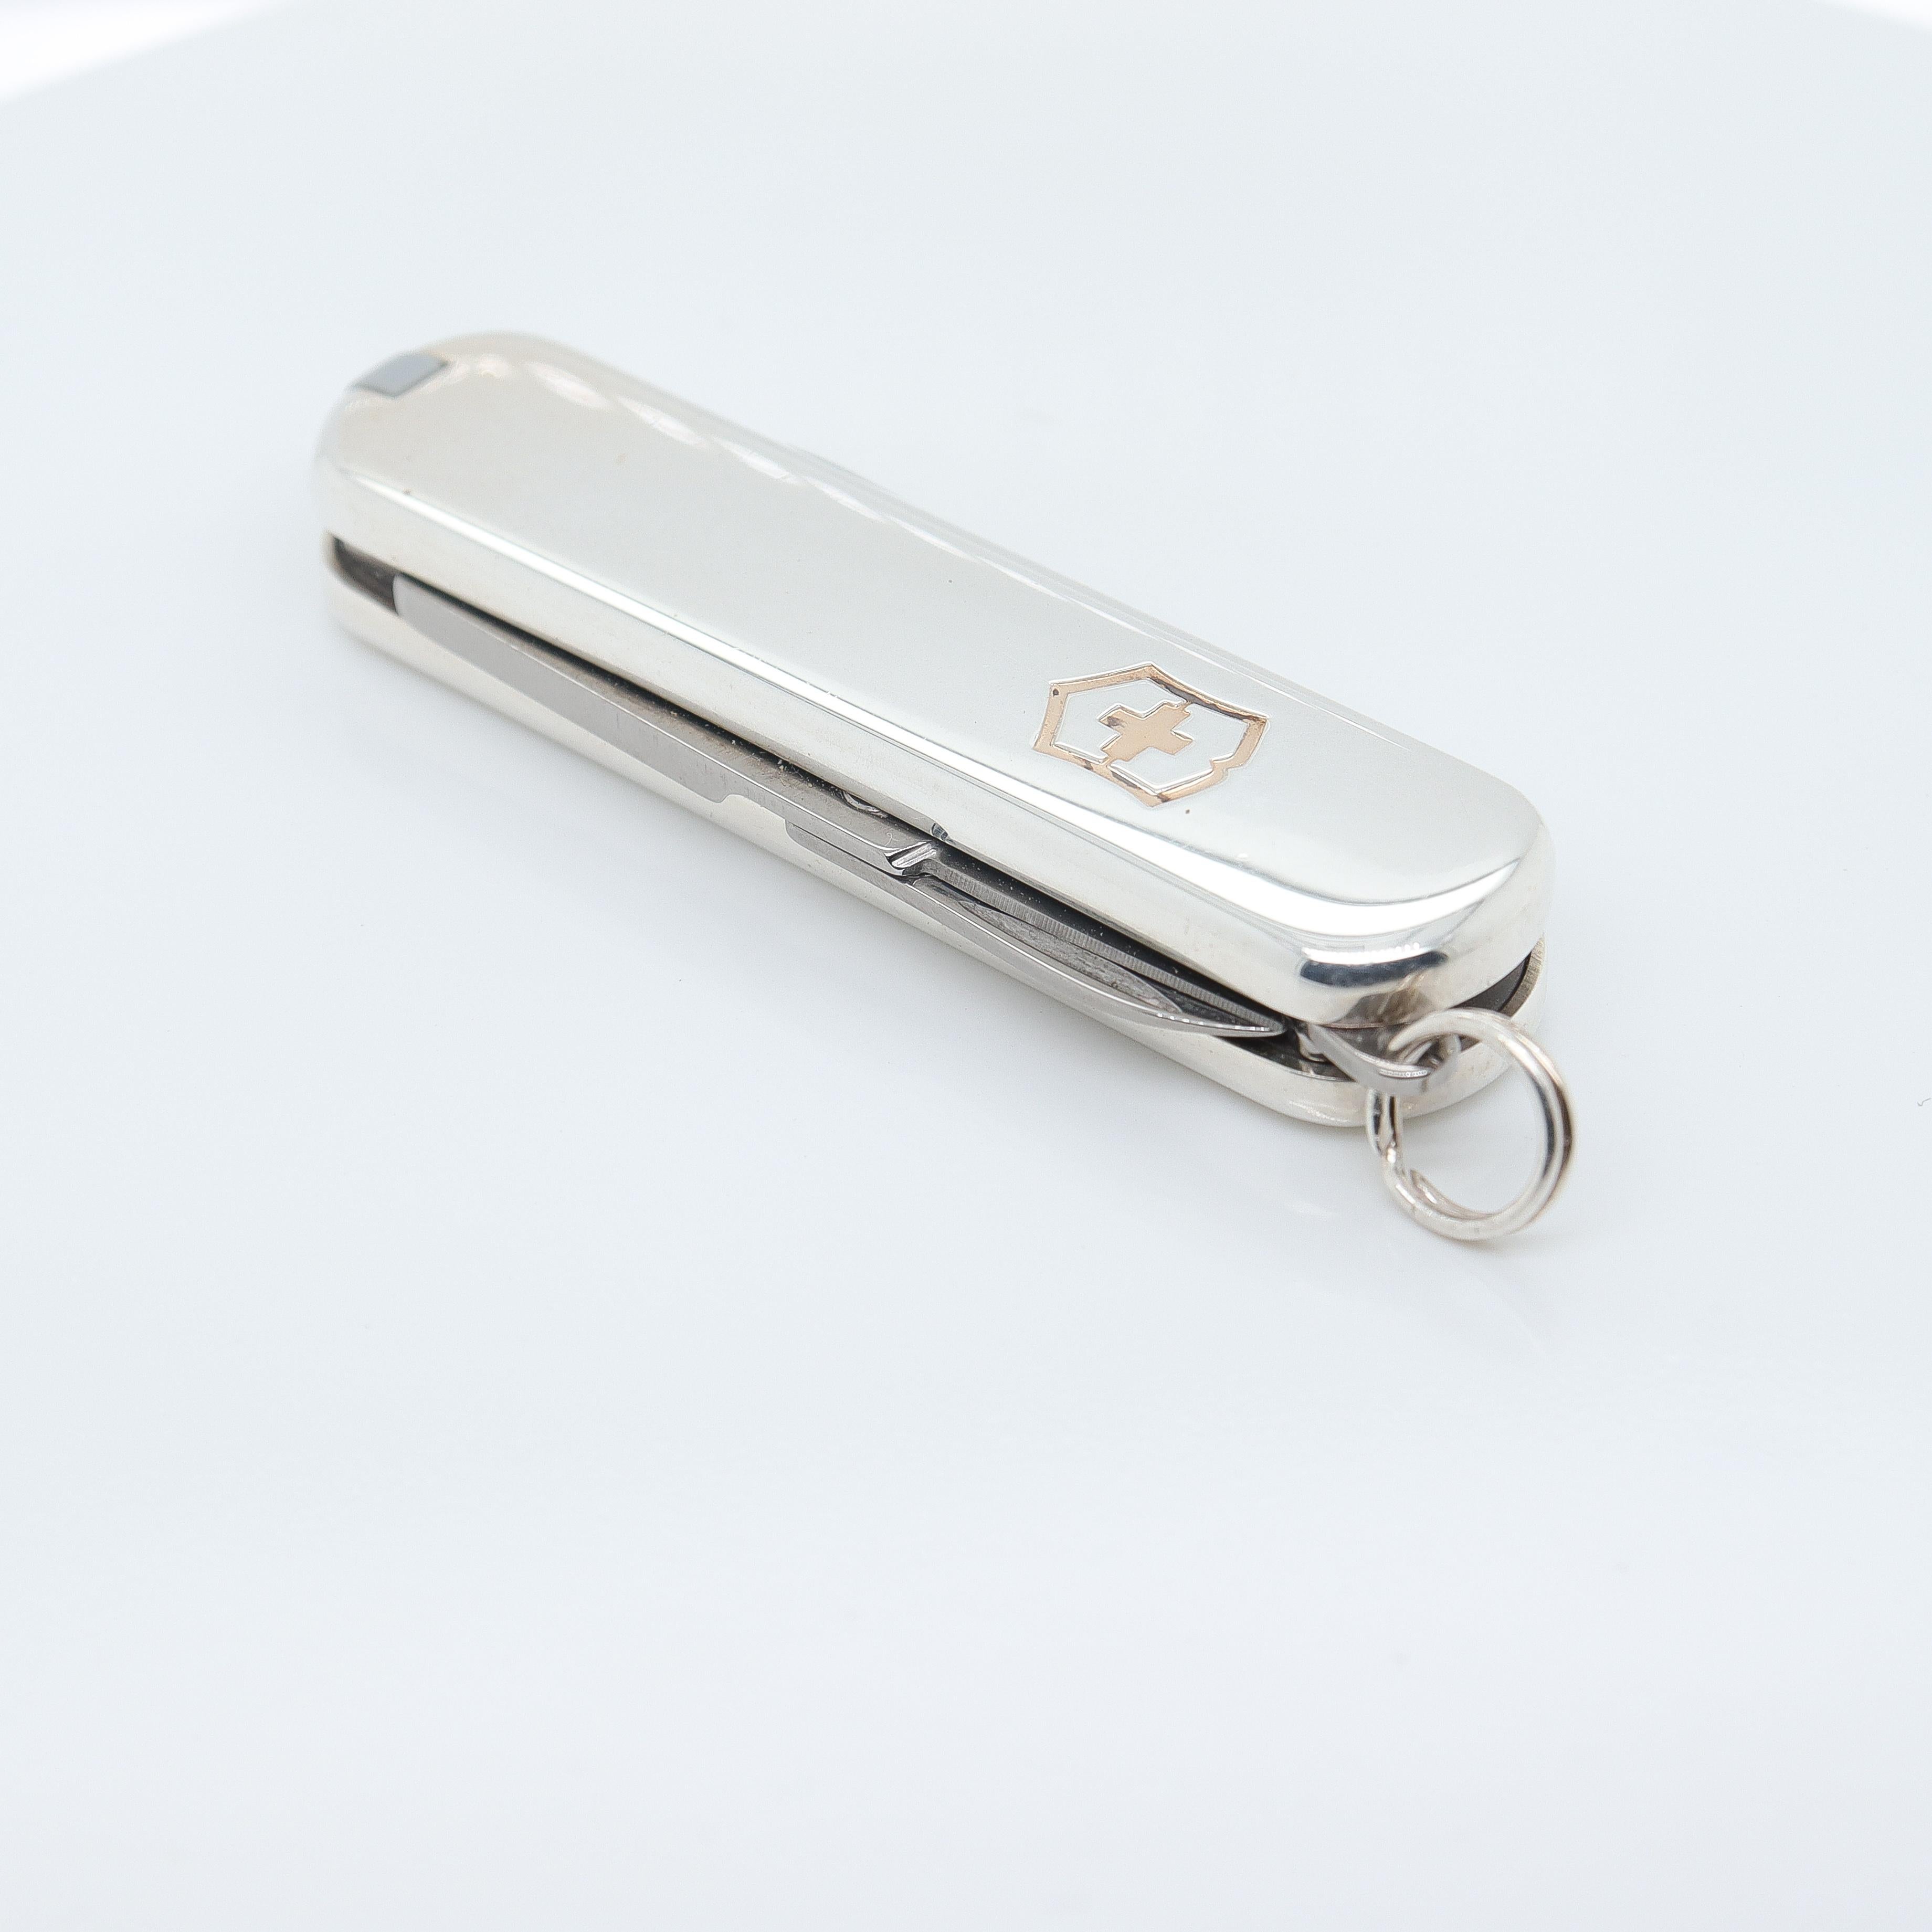 A fine vintage silver Swiss Army pocketknife.

In sterling silver & 18K gold.

By Tiffany & Co. in collaboration with Victorinox.

Contains a knife, scissors, and a nail file. The inlaid Victorinox shield and the bed of the file are finished in 18K